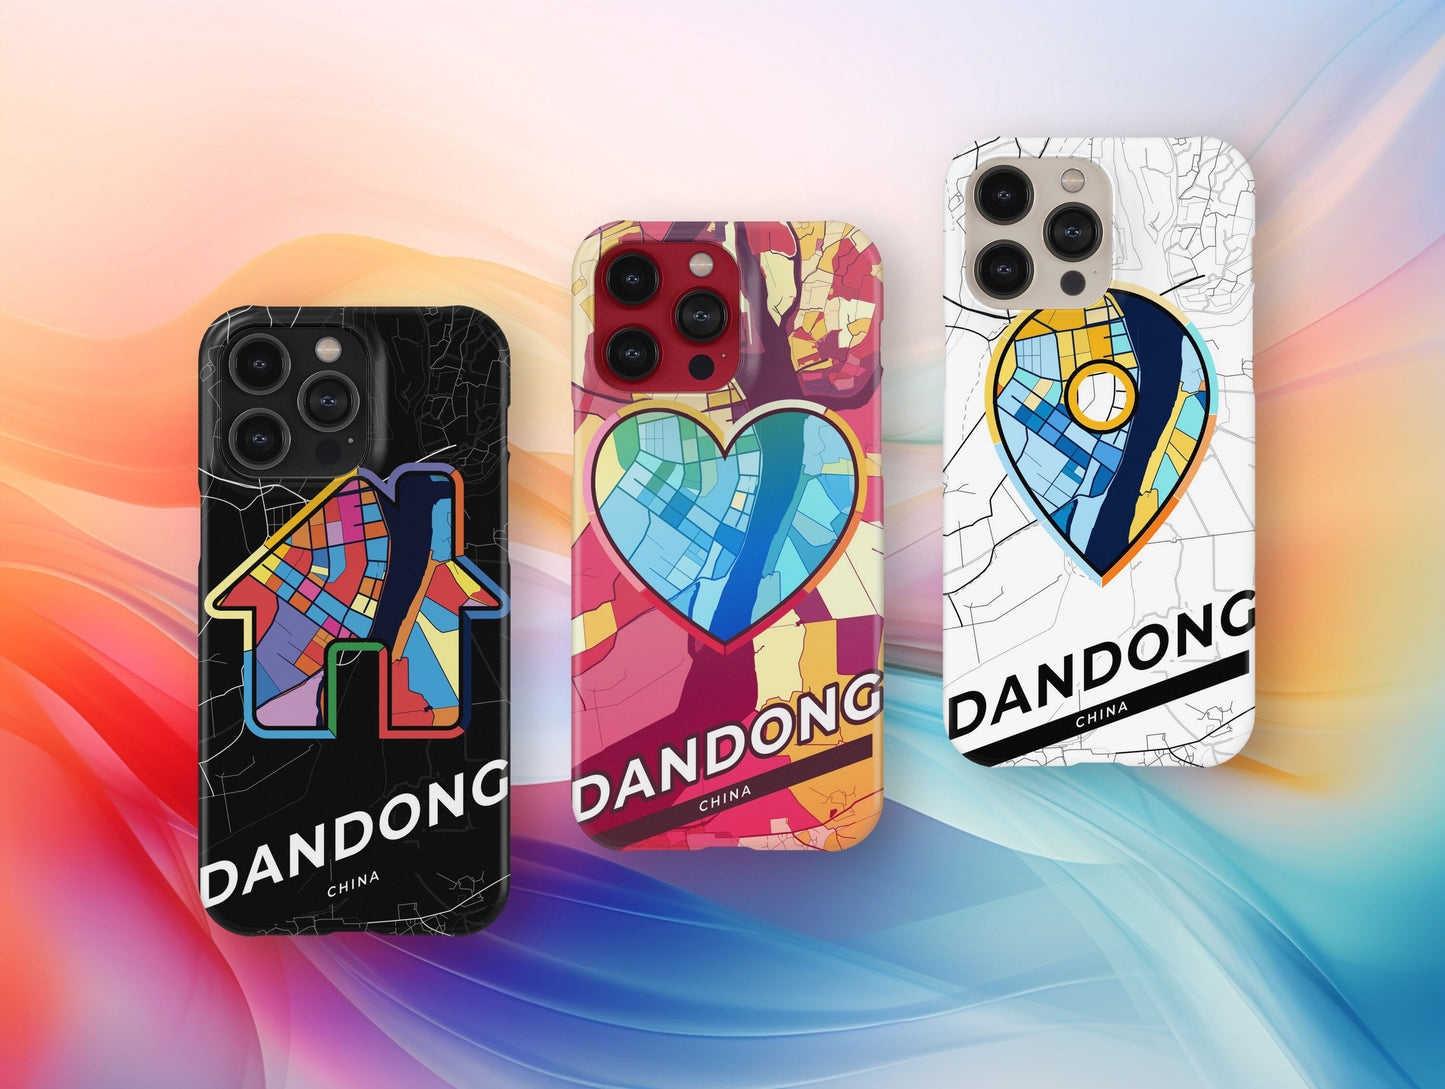 Dandong China slim phone case with colorful icon. Birthday, wedding or housewarming gift. Couple match cases.